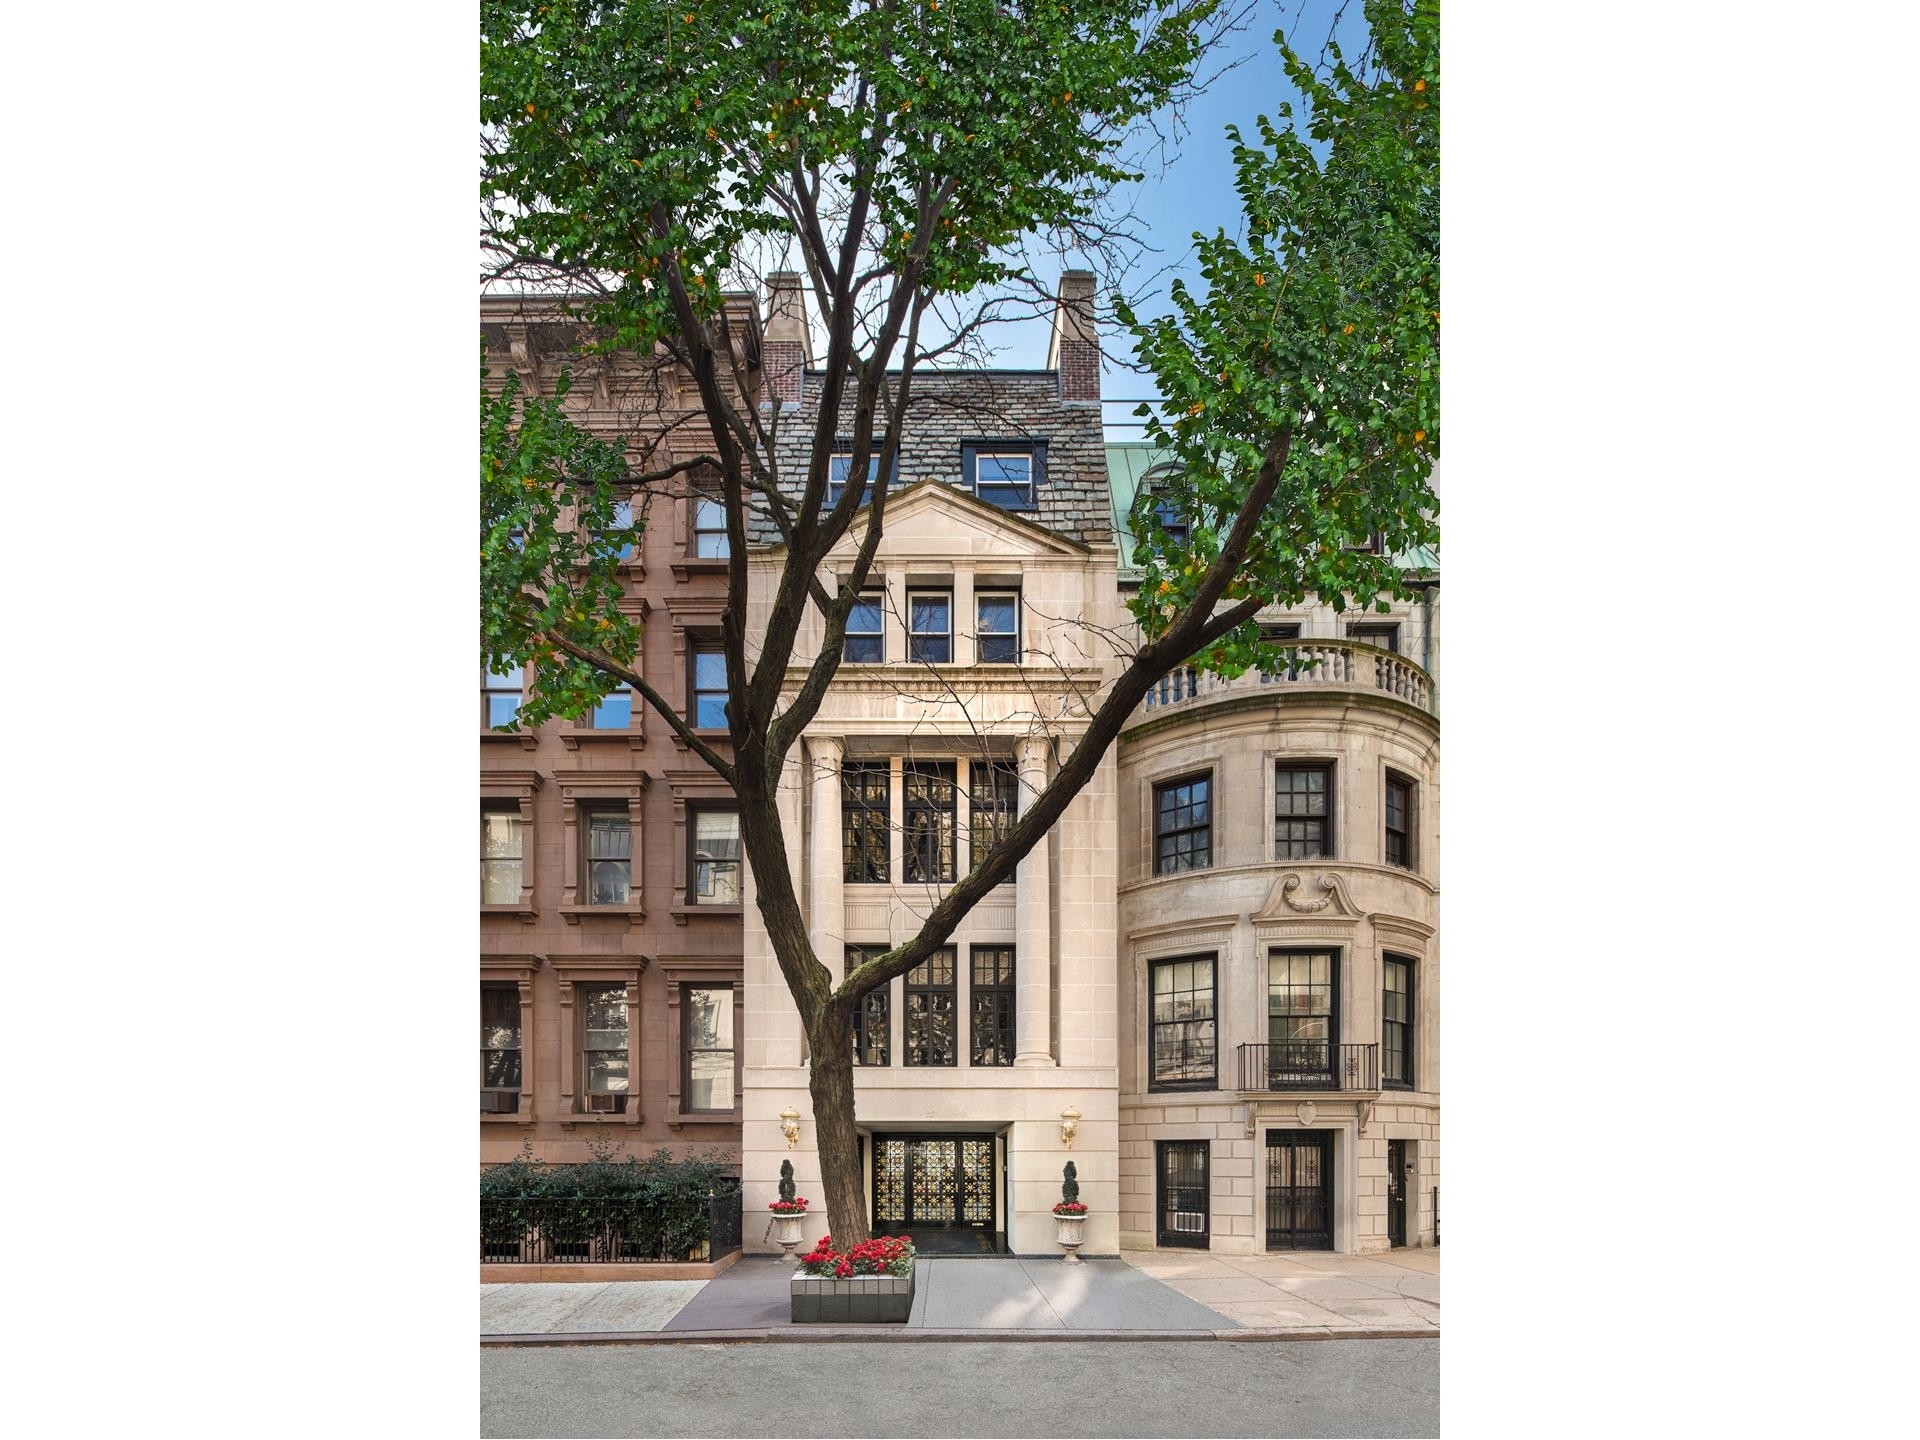 1. Single Family Townhouse for Sale at 10 E 64TH ST, TOWNHOUSE Lenox Hill, New York, NY 10065